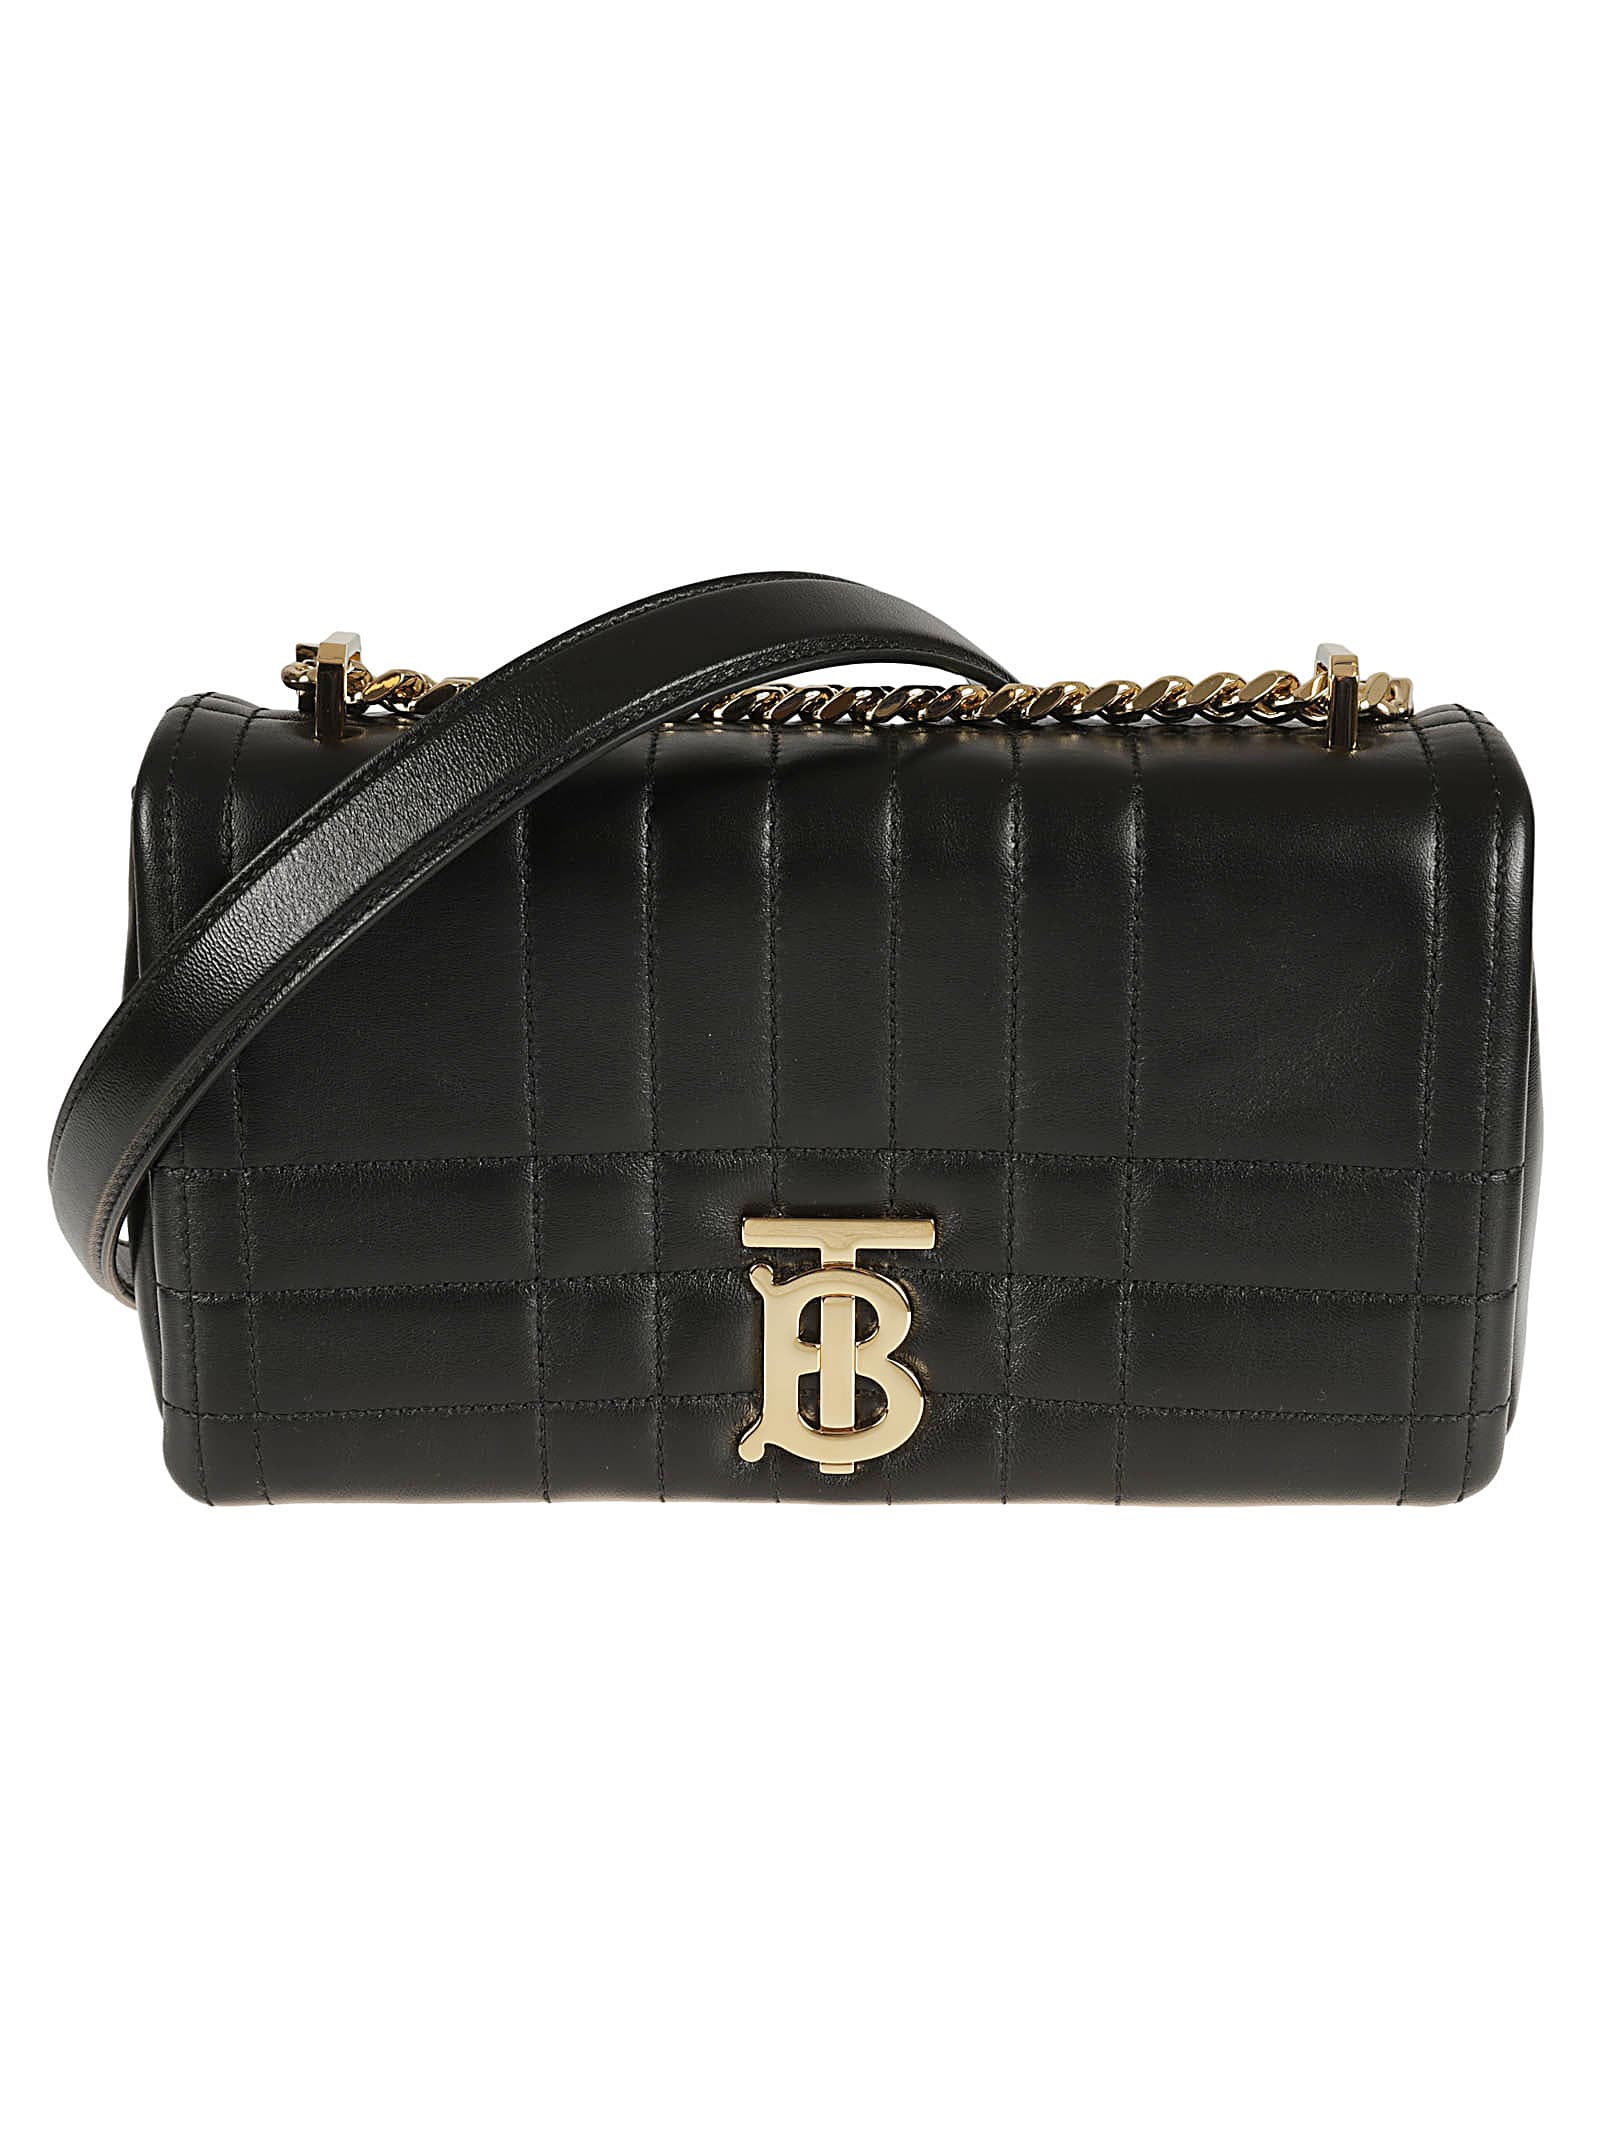 Burberry Logo Quilted Chain Shoulder Bag